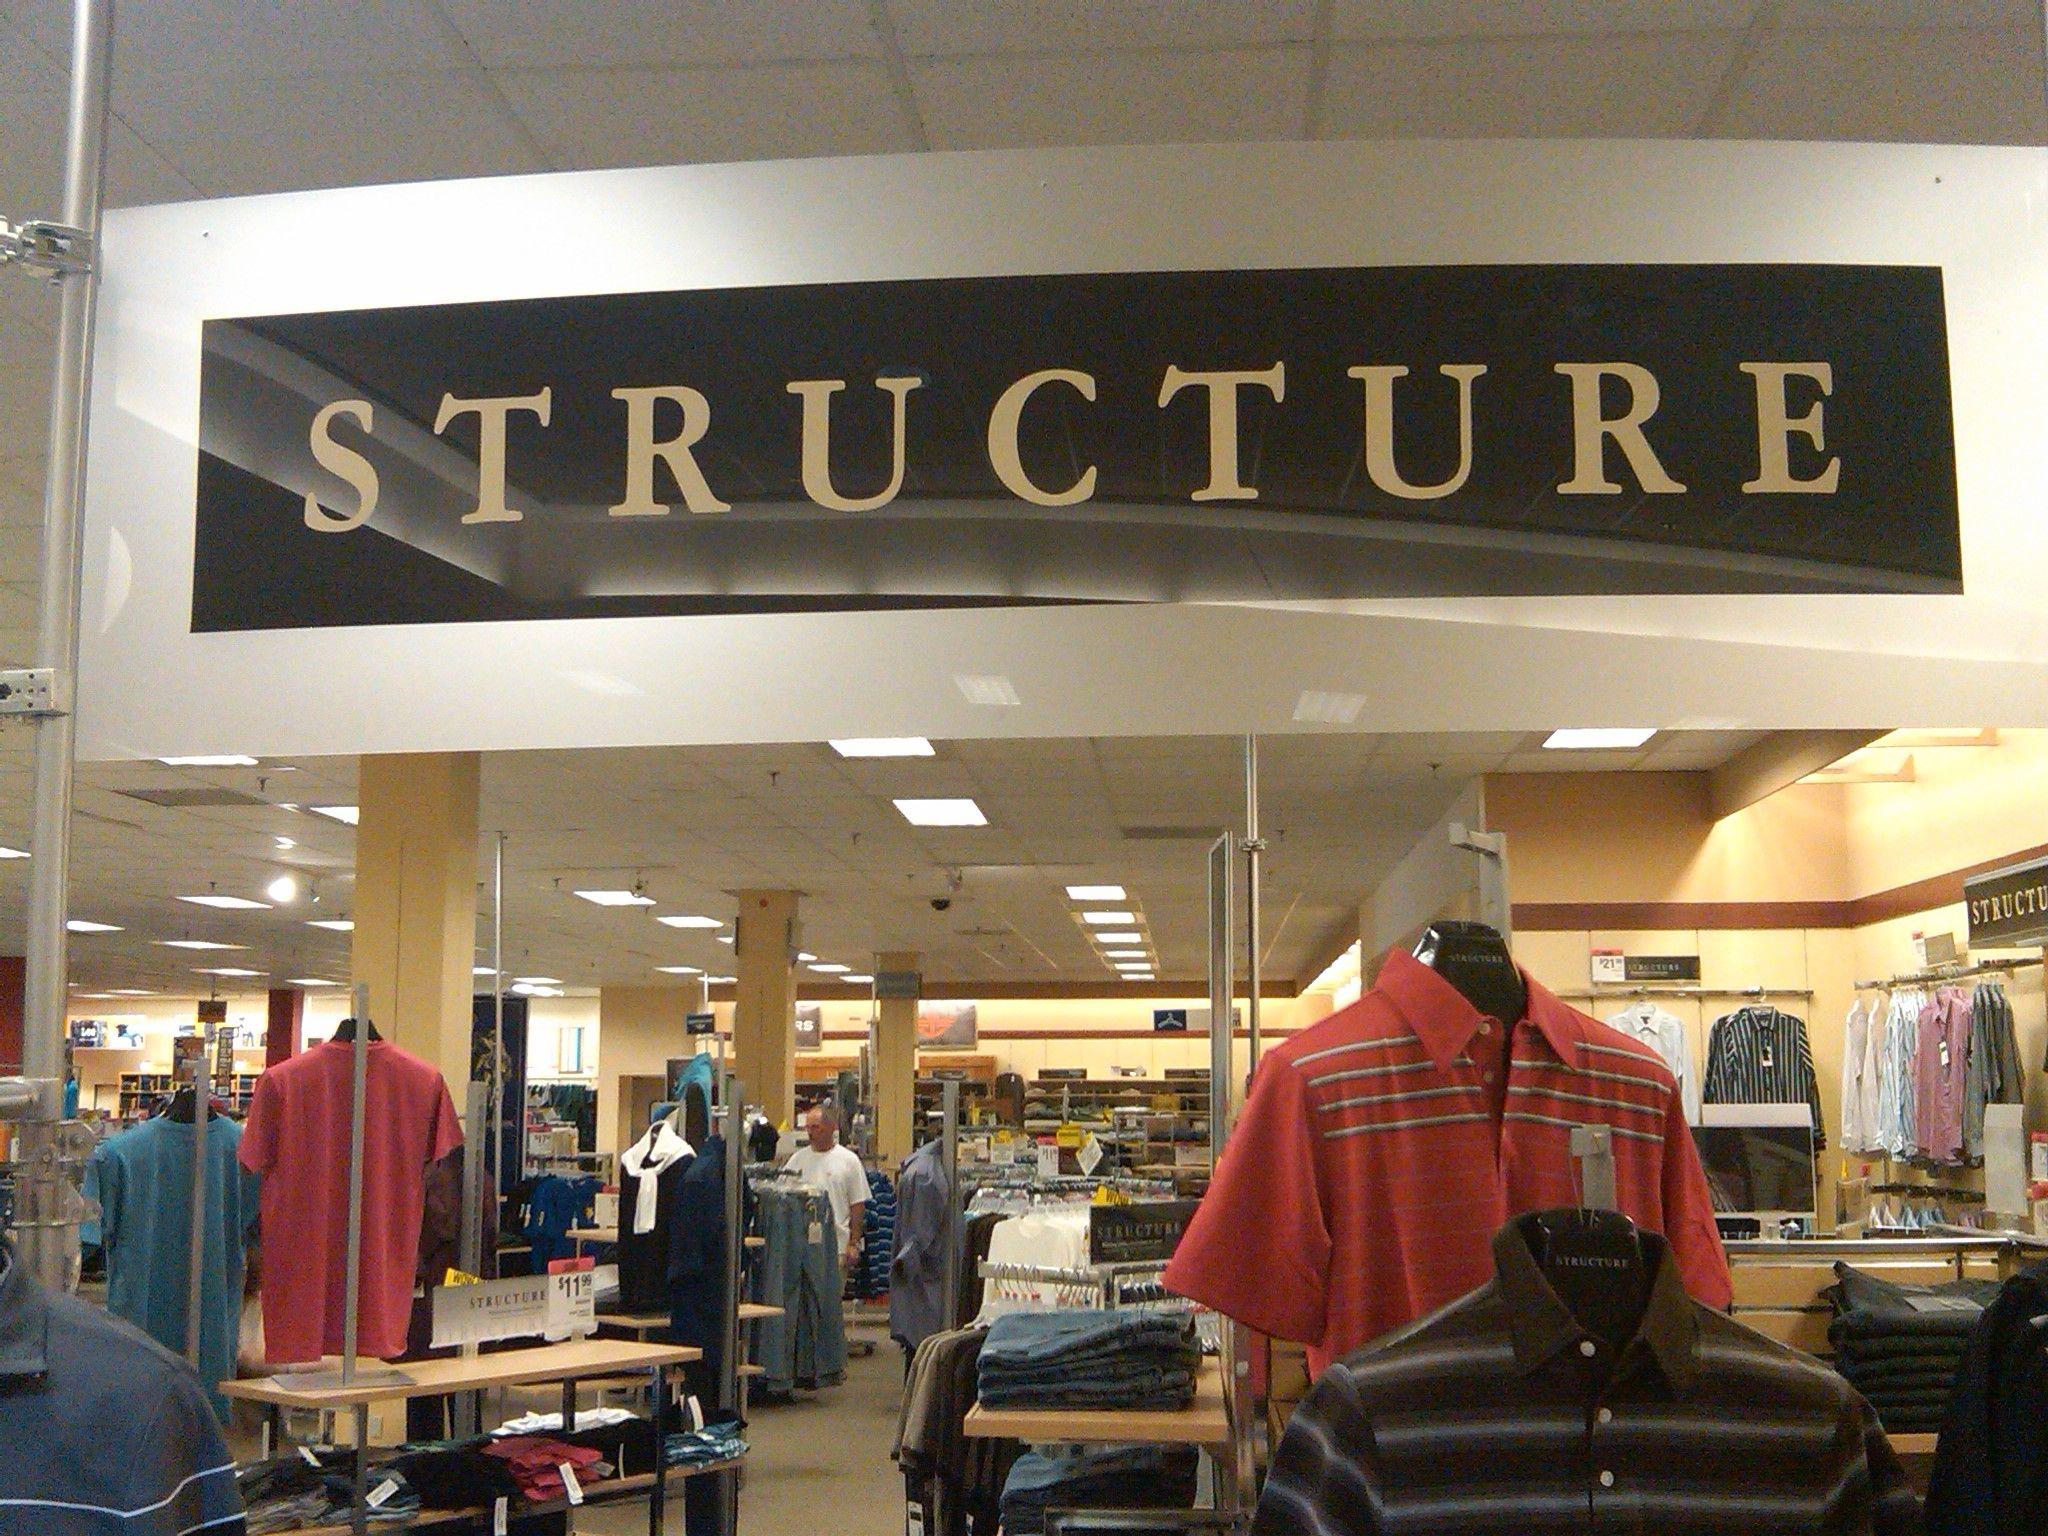 Express Clothing Store Logo - Has The Structure Brand Crumbled? | DuetsBlog